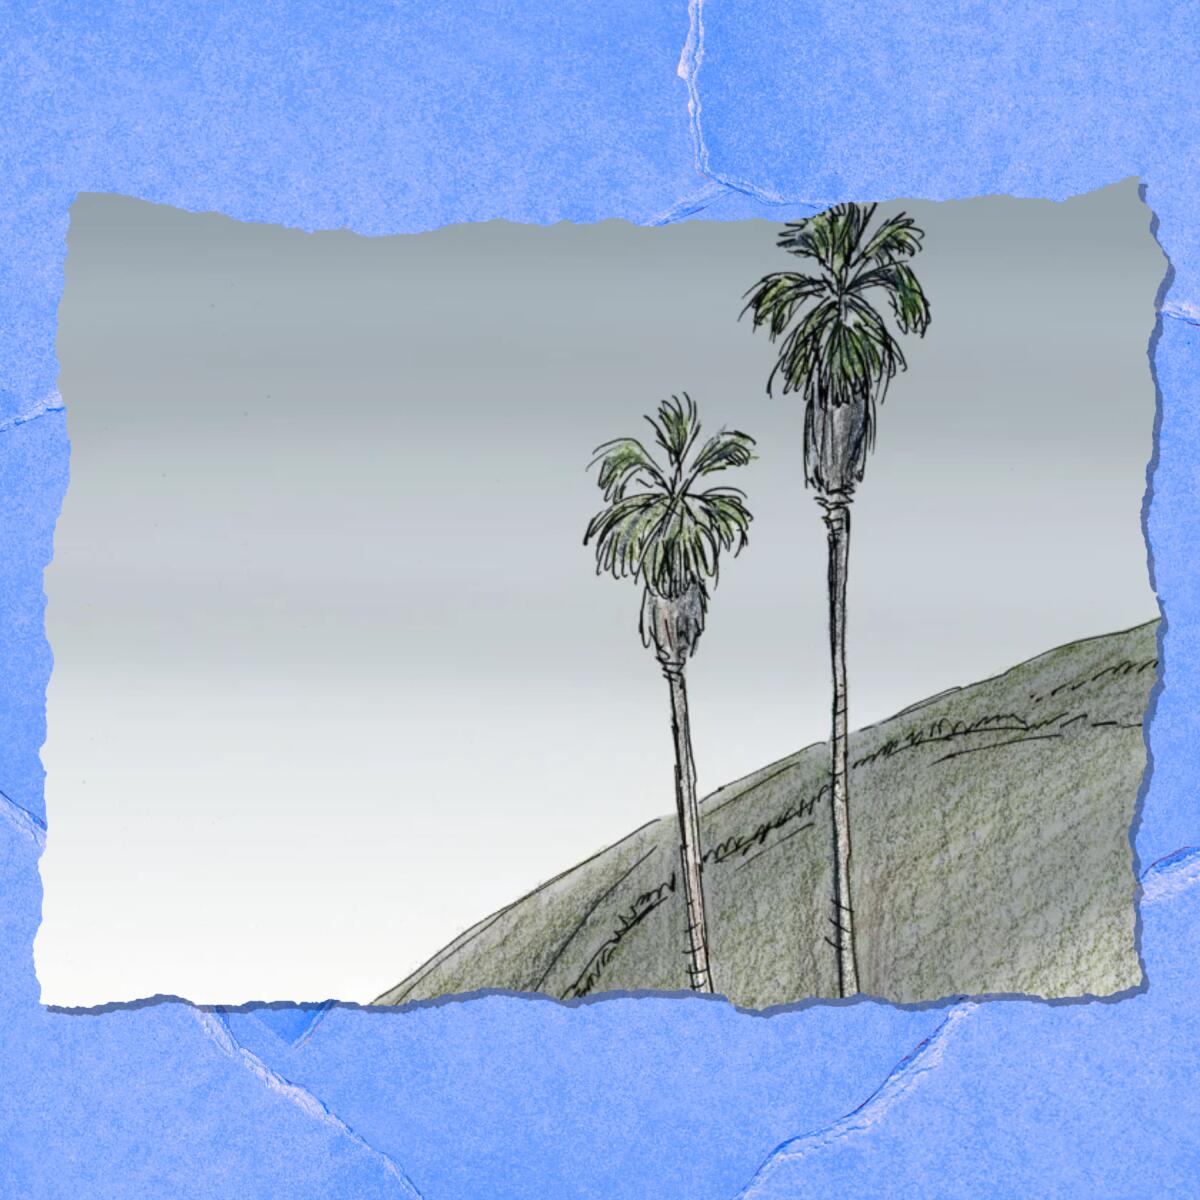 Illustration of two palm trees on an overcast sky background.